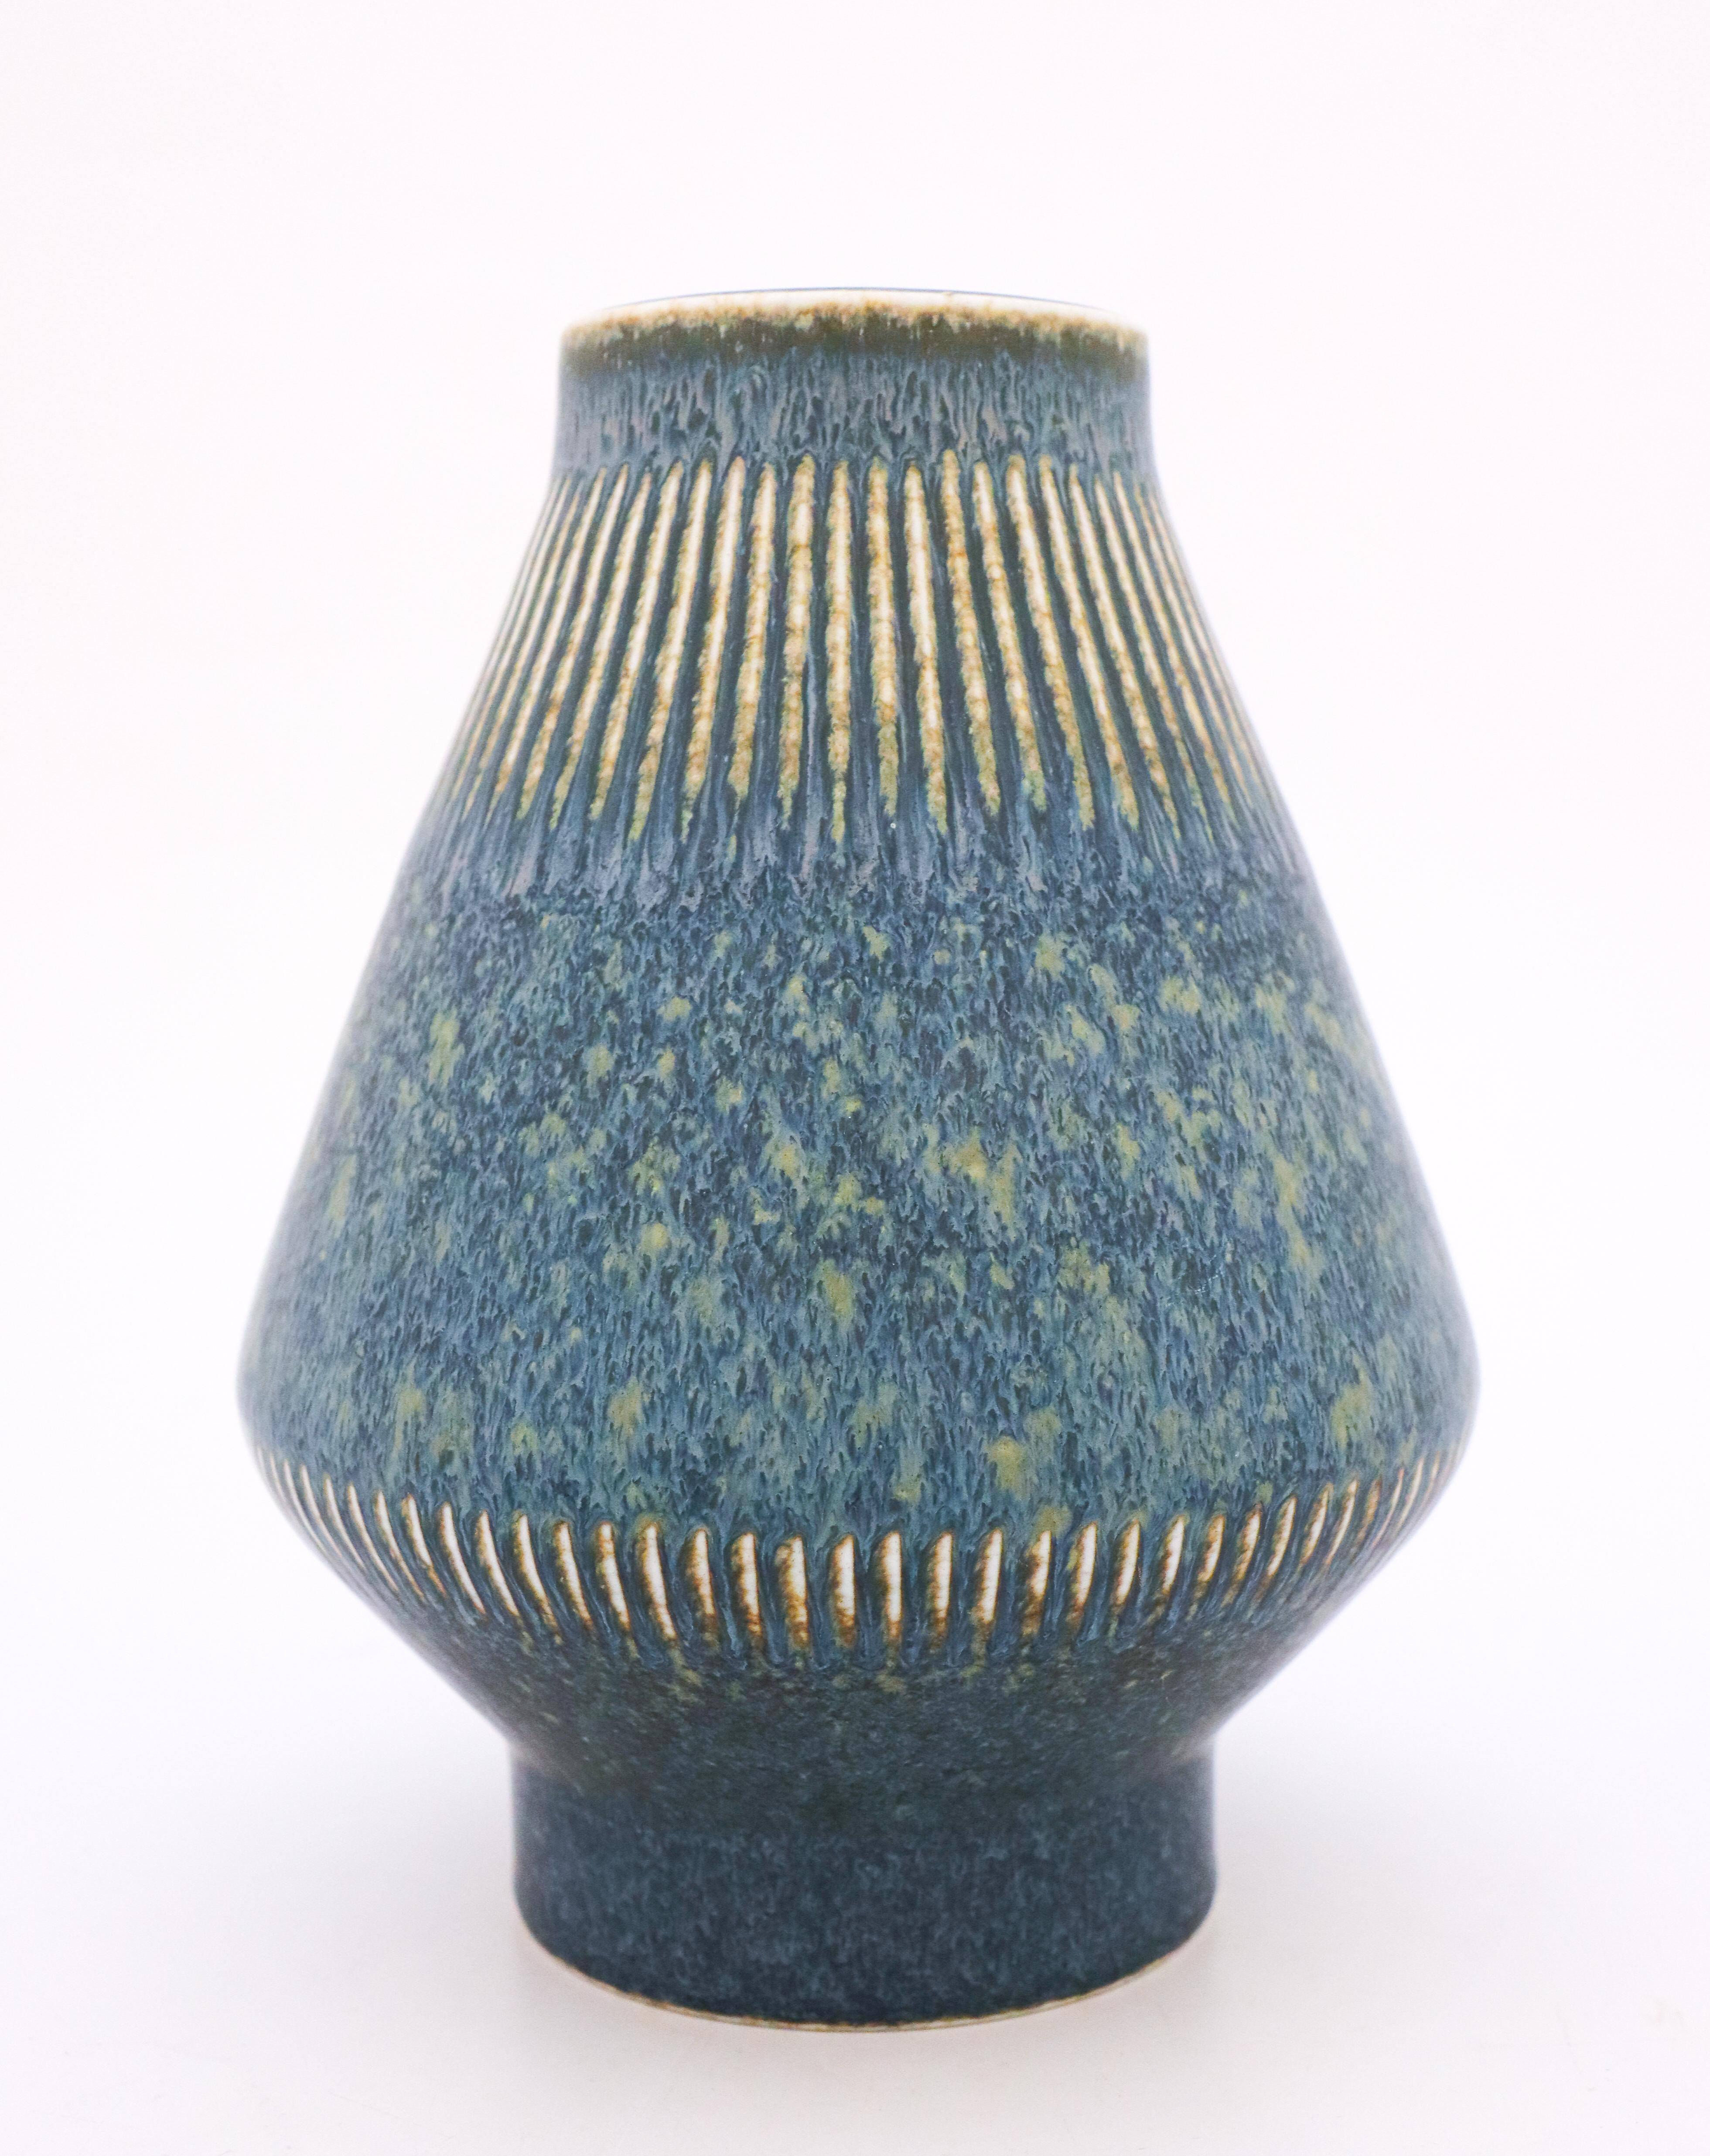 Midcentury Swedish vase in stoneware by Rörstrand, designed by Carl-Harry Stålhane. This vase is in very good vintage condition.